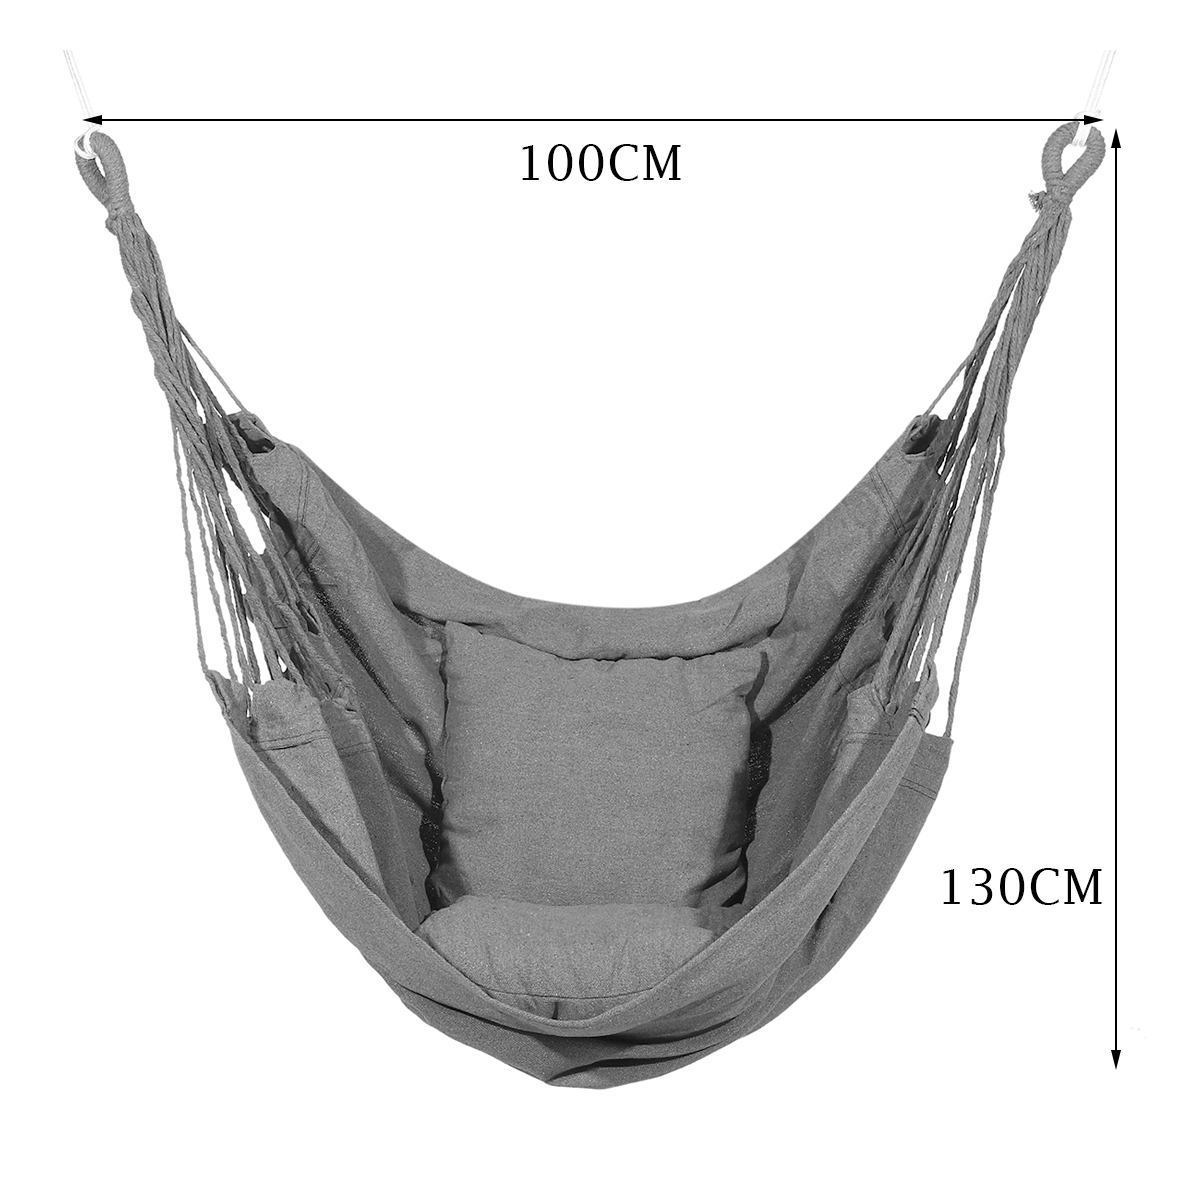 100x130cm-Camping-Hammock-Hanging-Bed-Outdoor-Beach-Travel-Swing-Max-Load-150kg-1633994-2